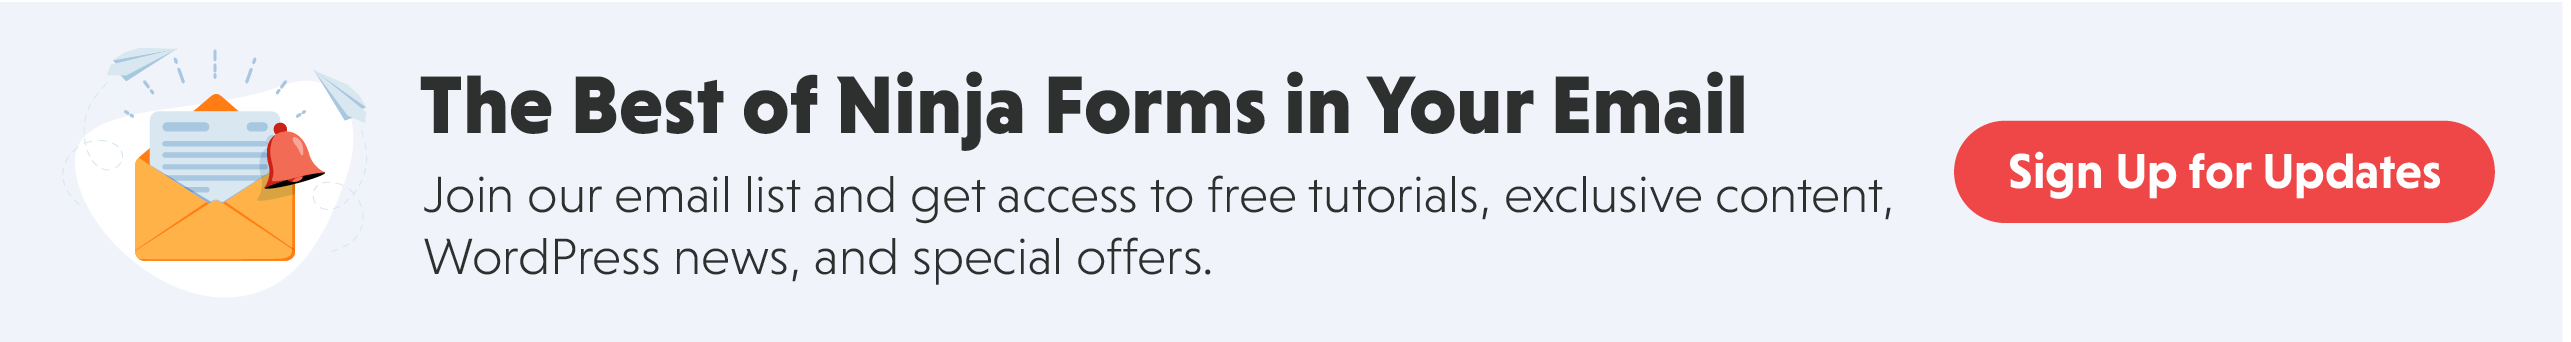 Get access to free tutorials, exclusive content and more.